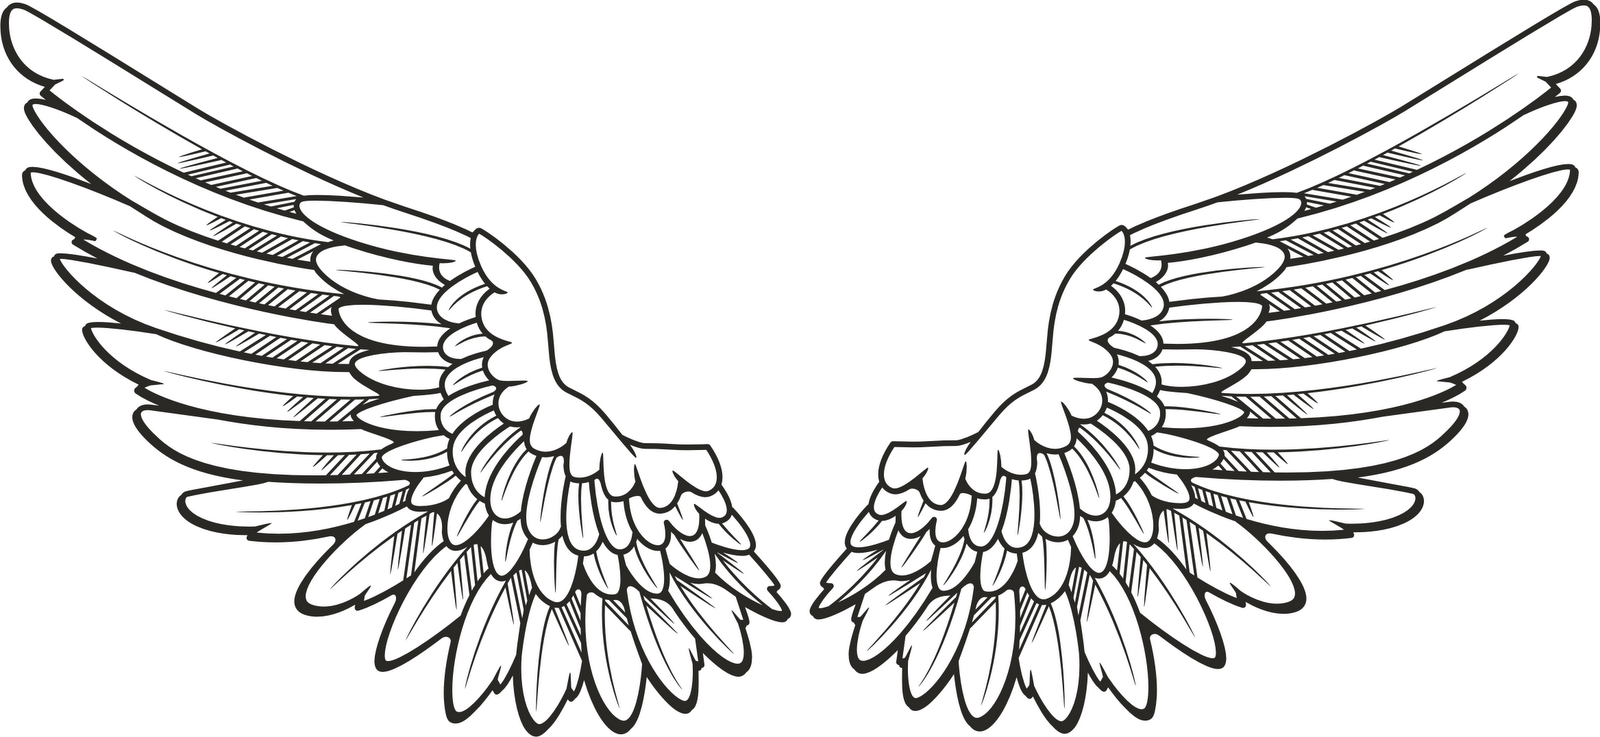 Wing clipart. R minecraft wings feathers